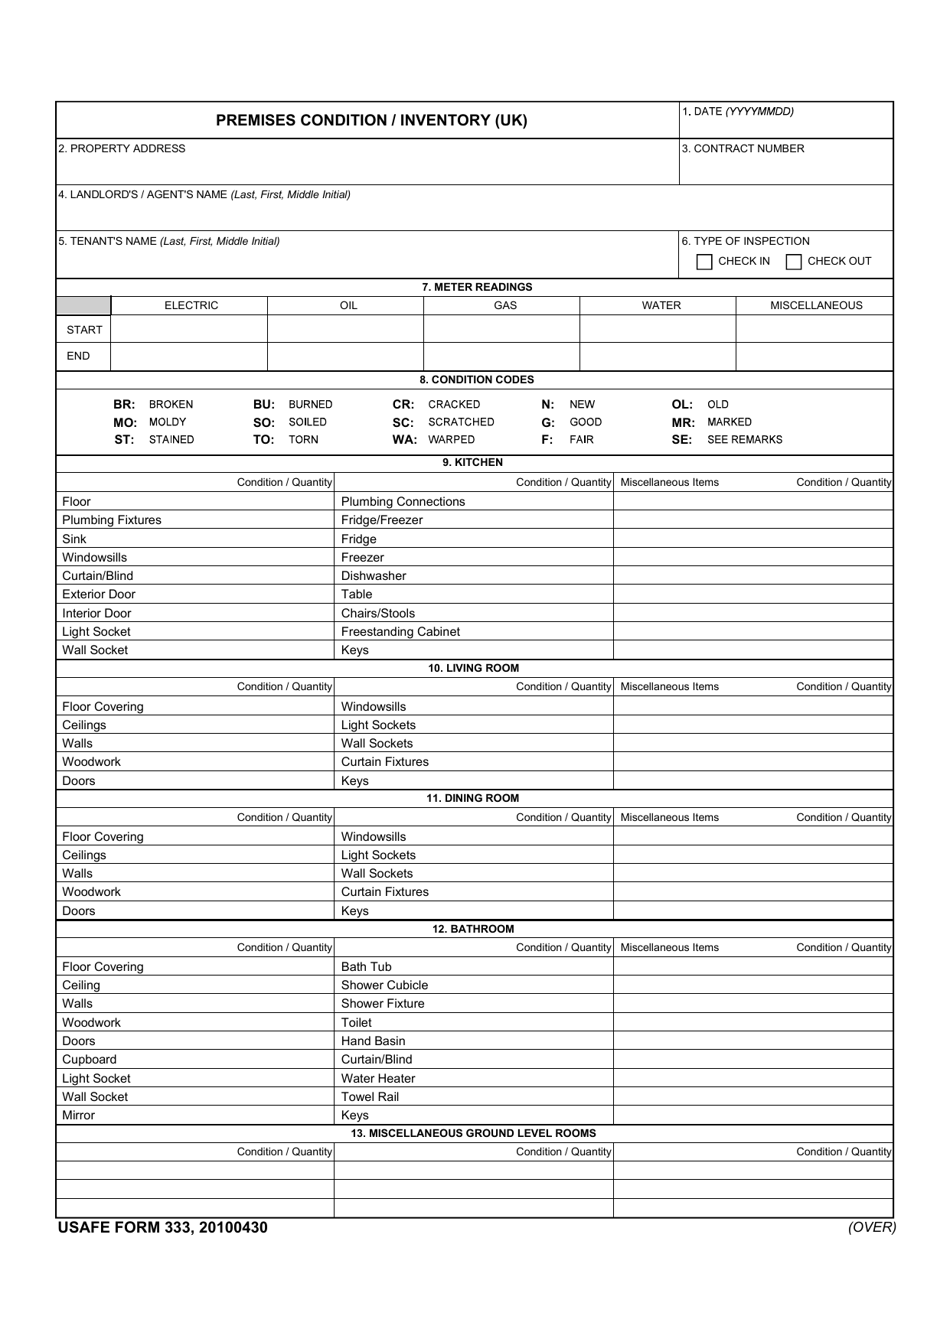 USAFE Form 333 Premises Condition / Inventory (UK), Page 1